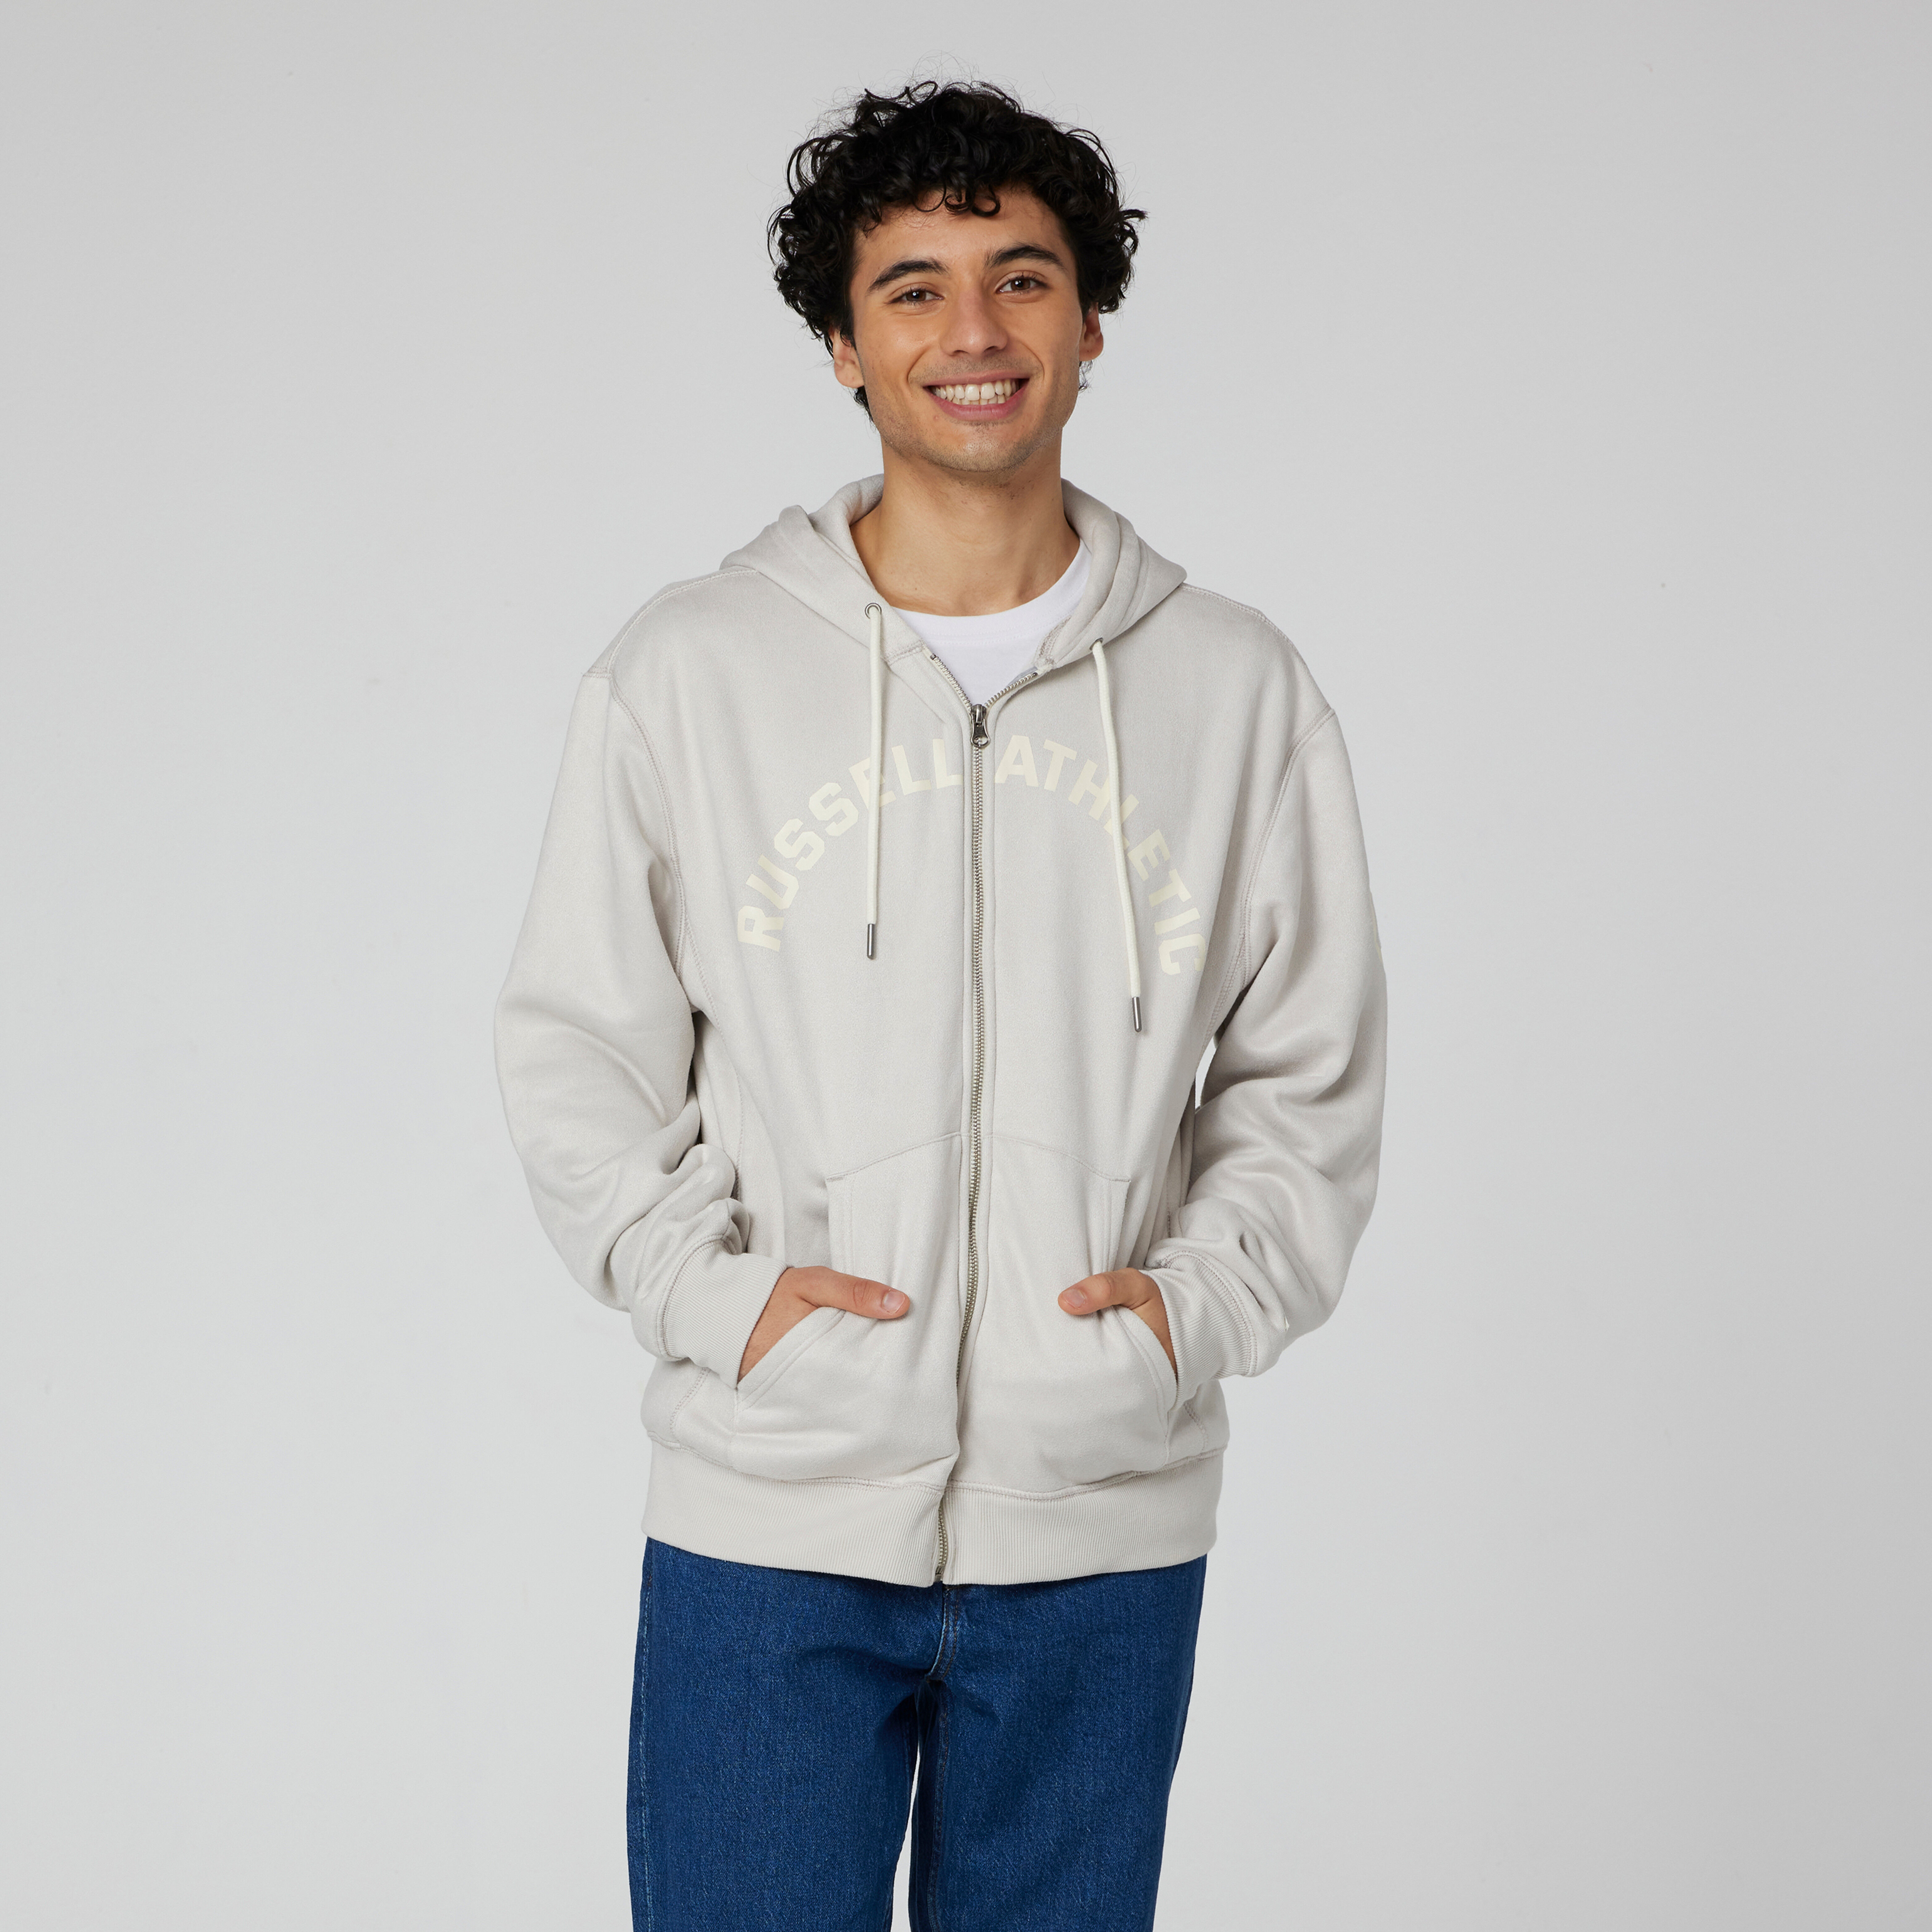 Russell Athletic Men's Arch Graphic Zip Hoodie l Russell Athletic.com